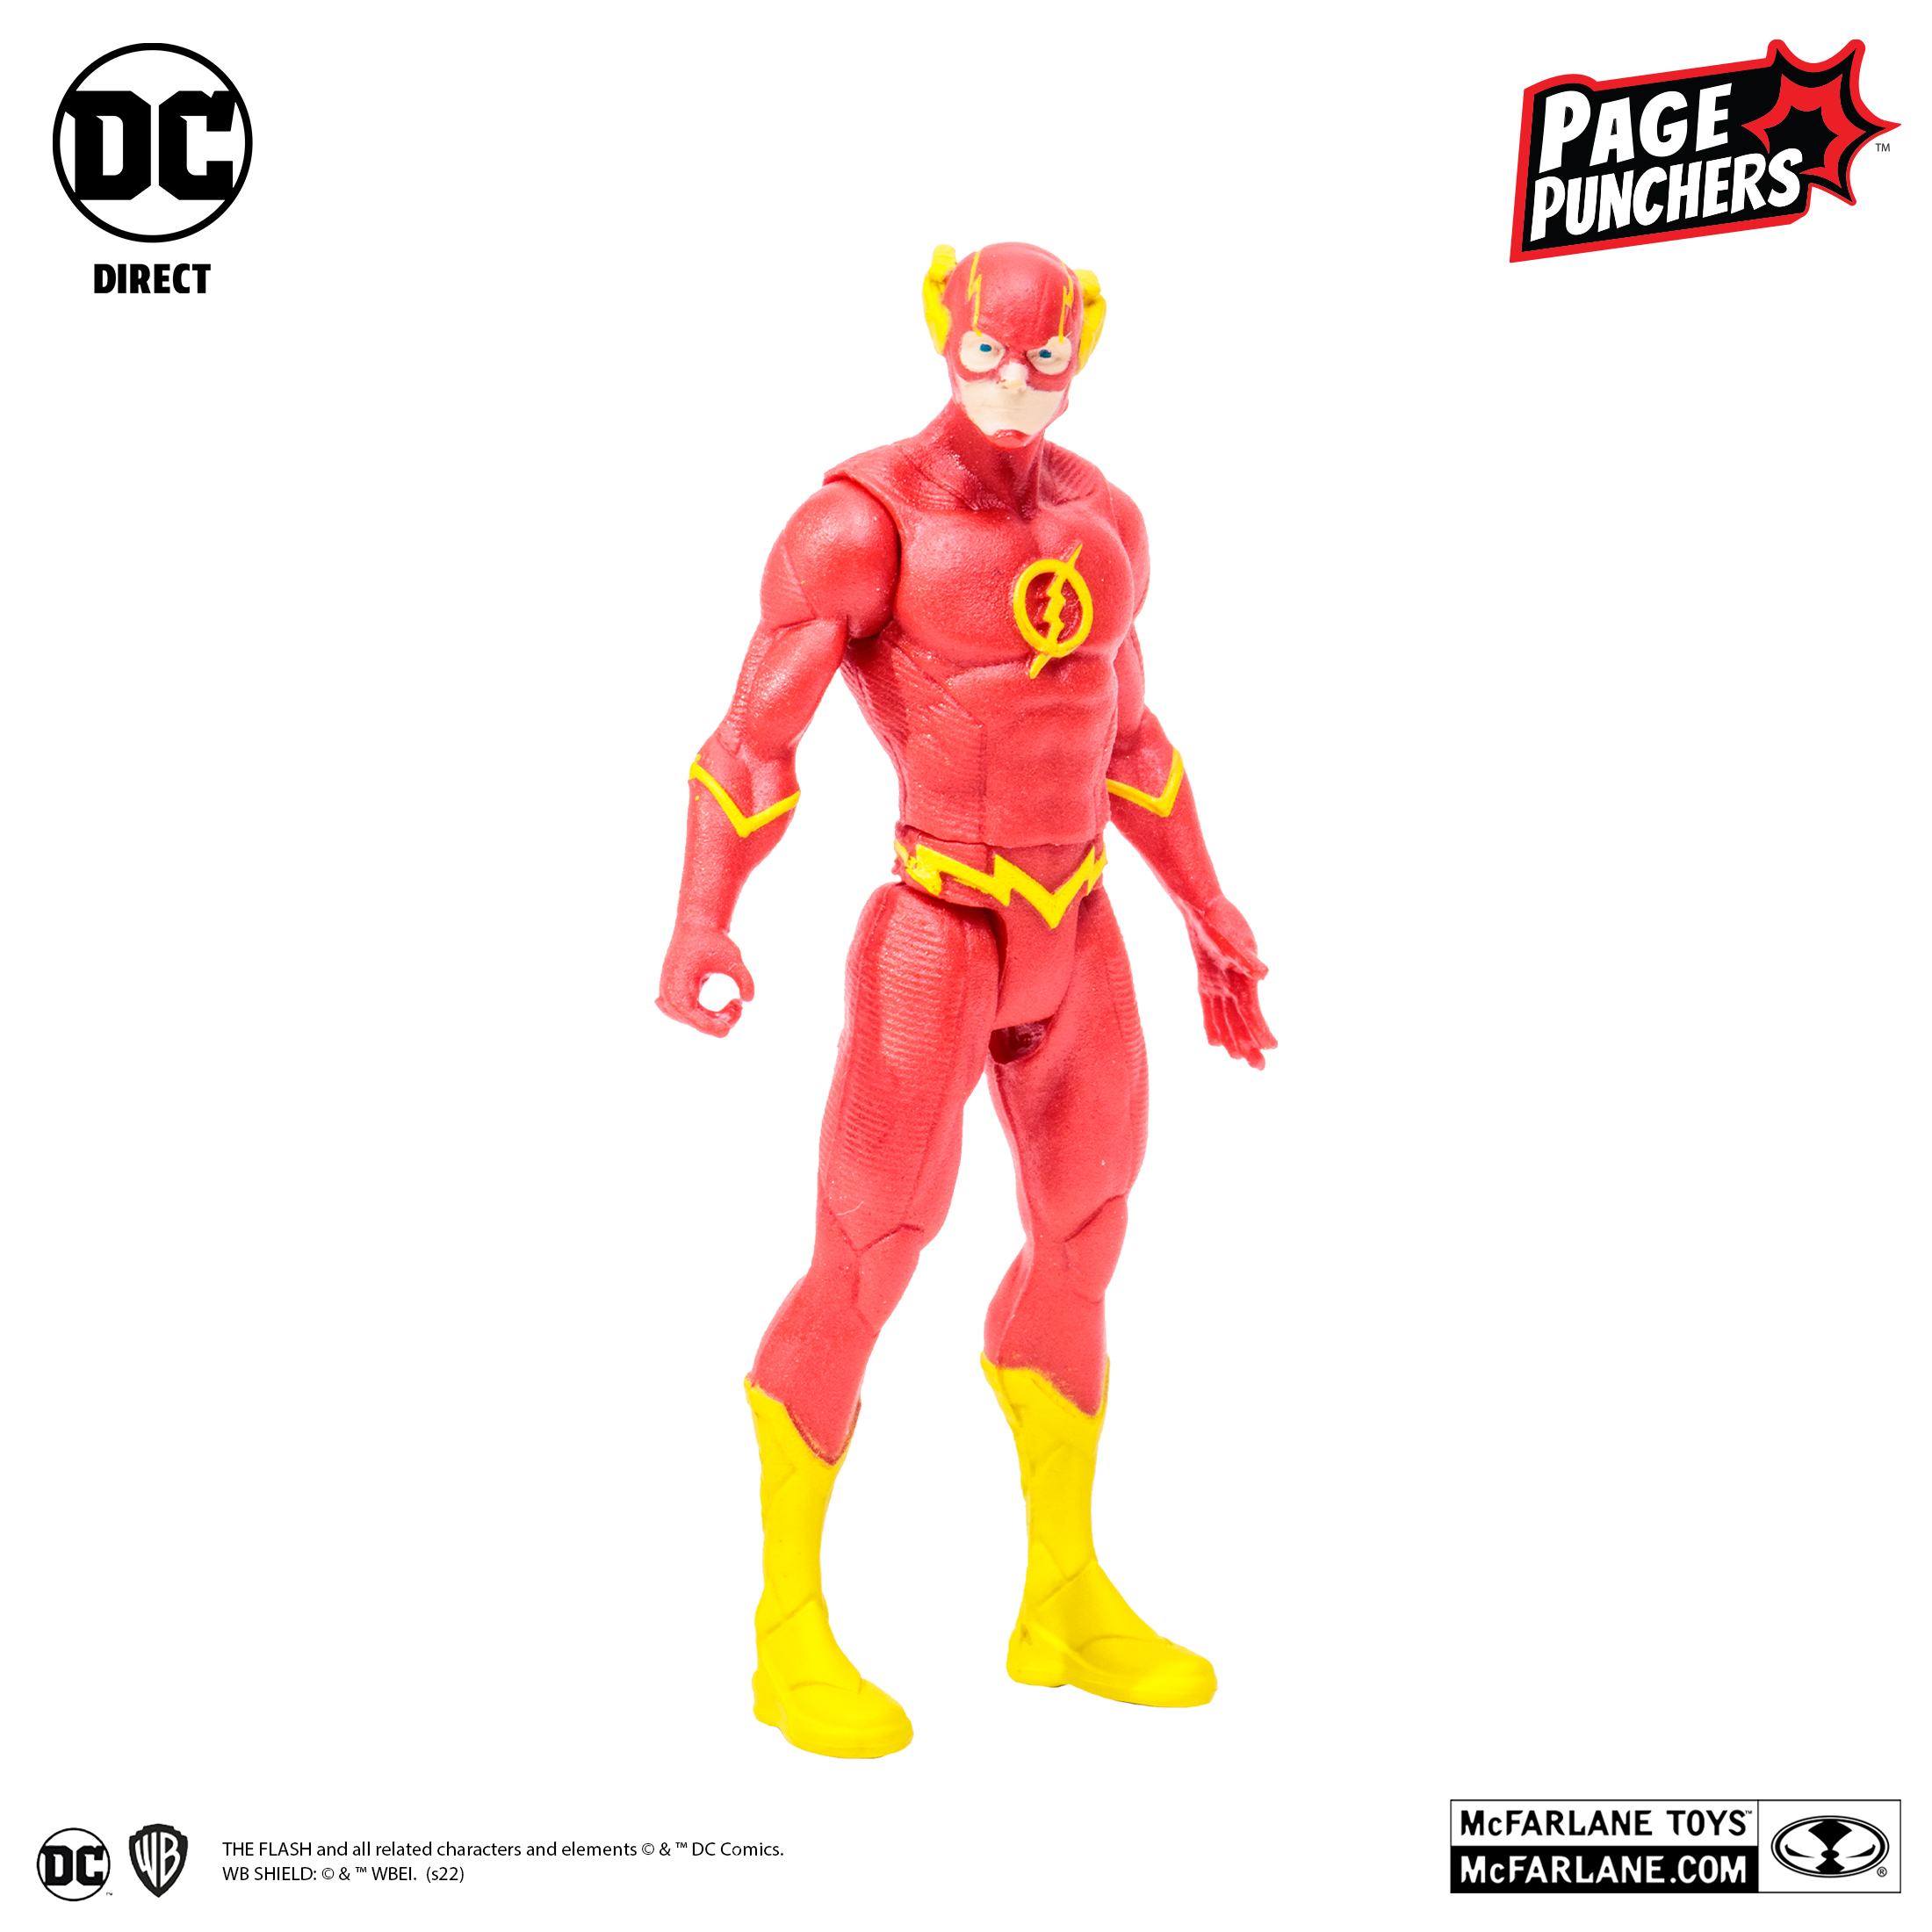 The Flash 3″ Figure with Comic (Page Punchers)